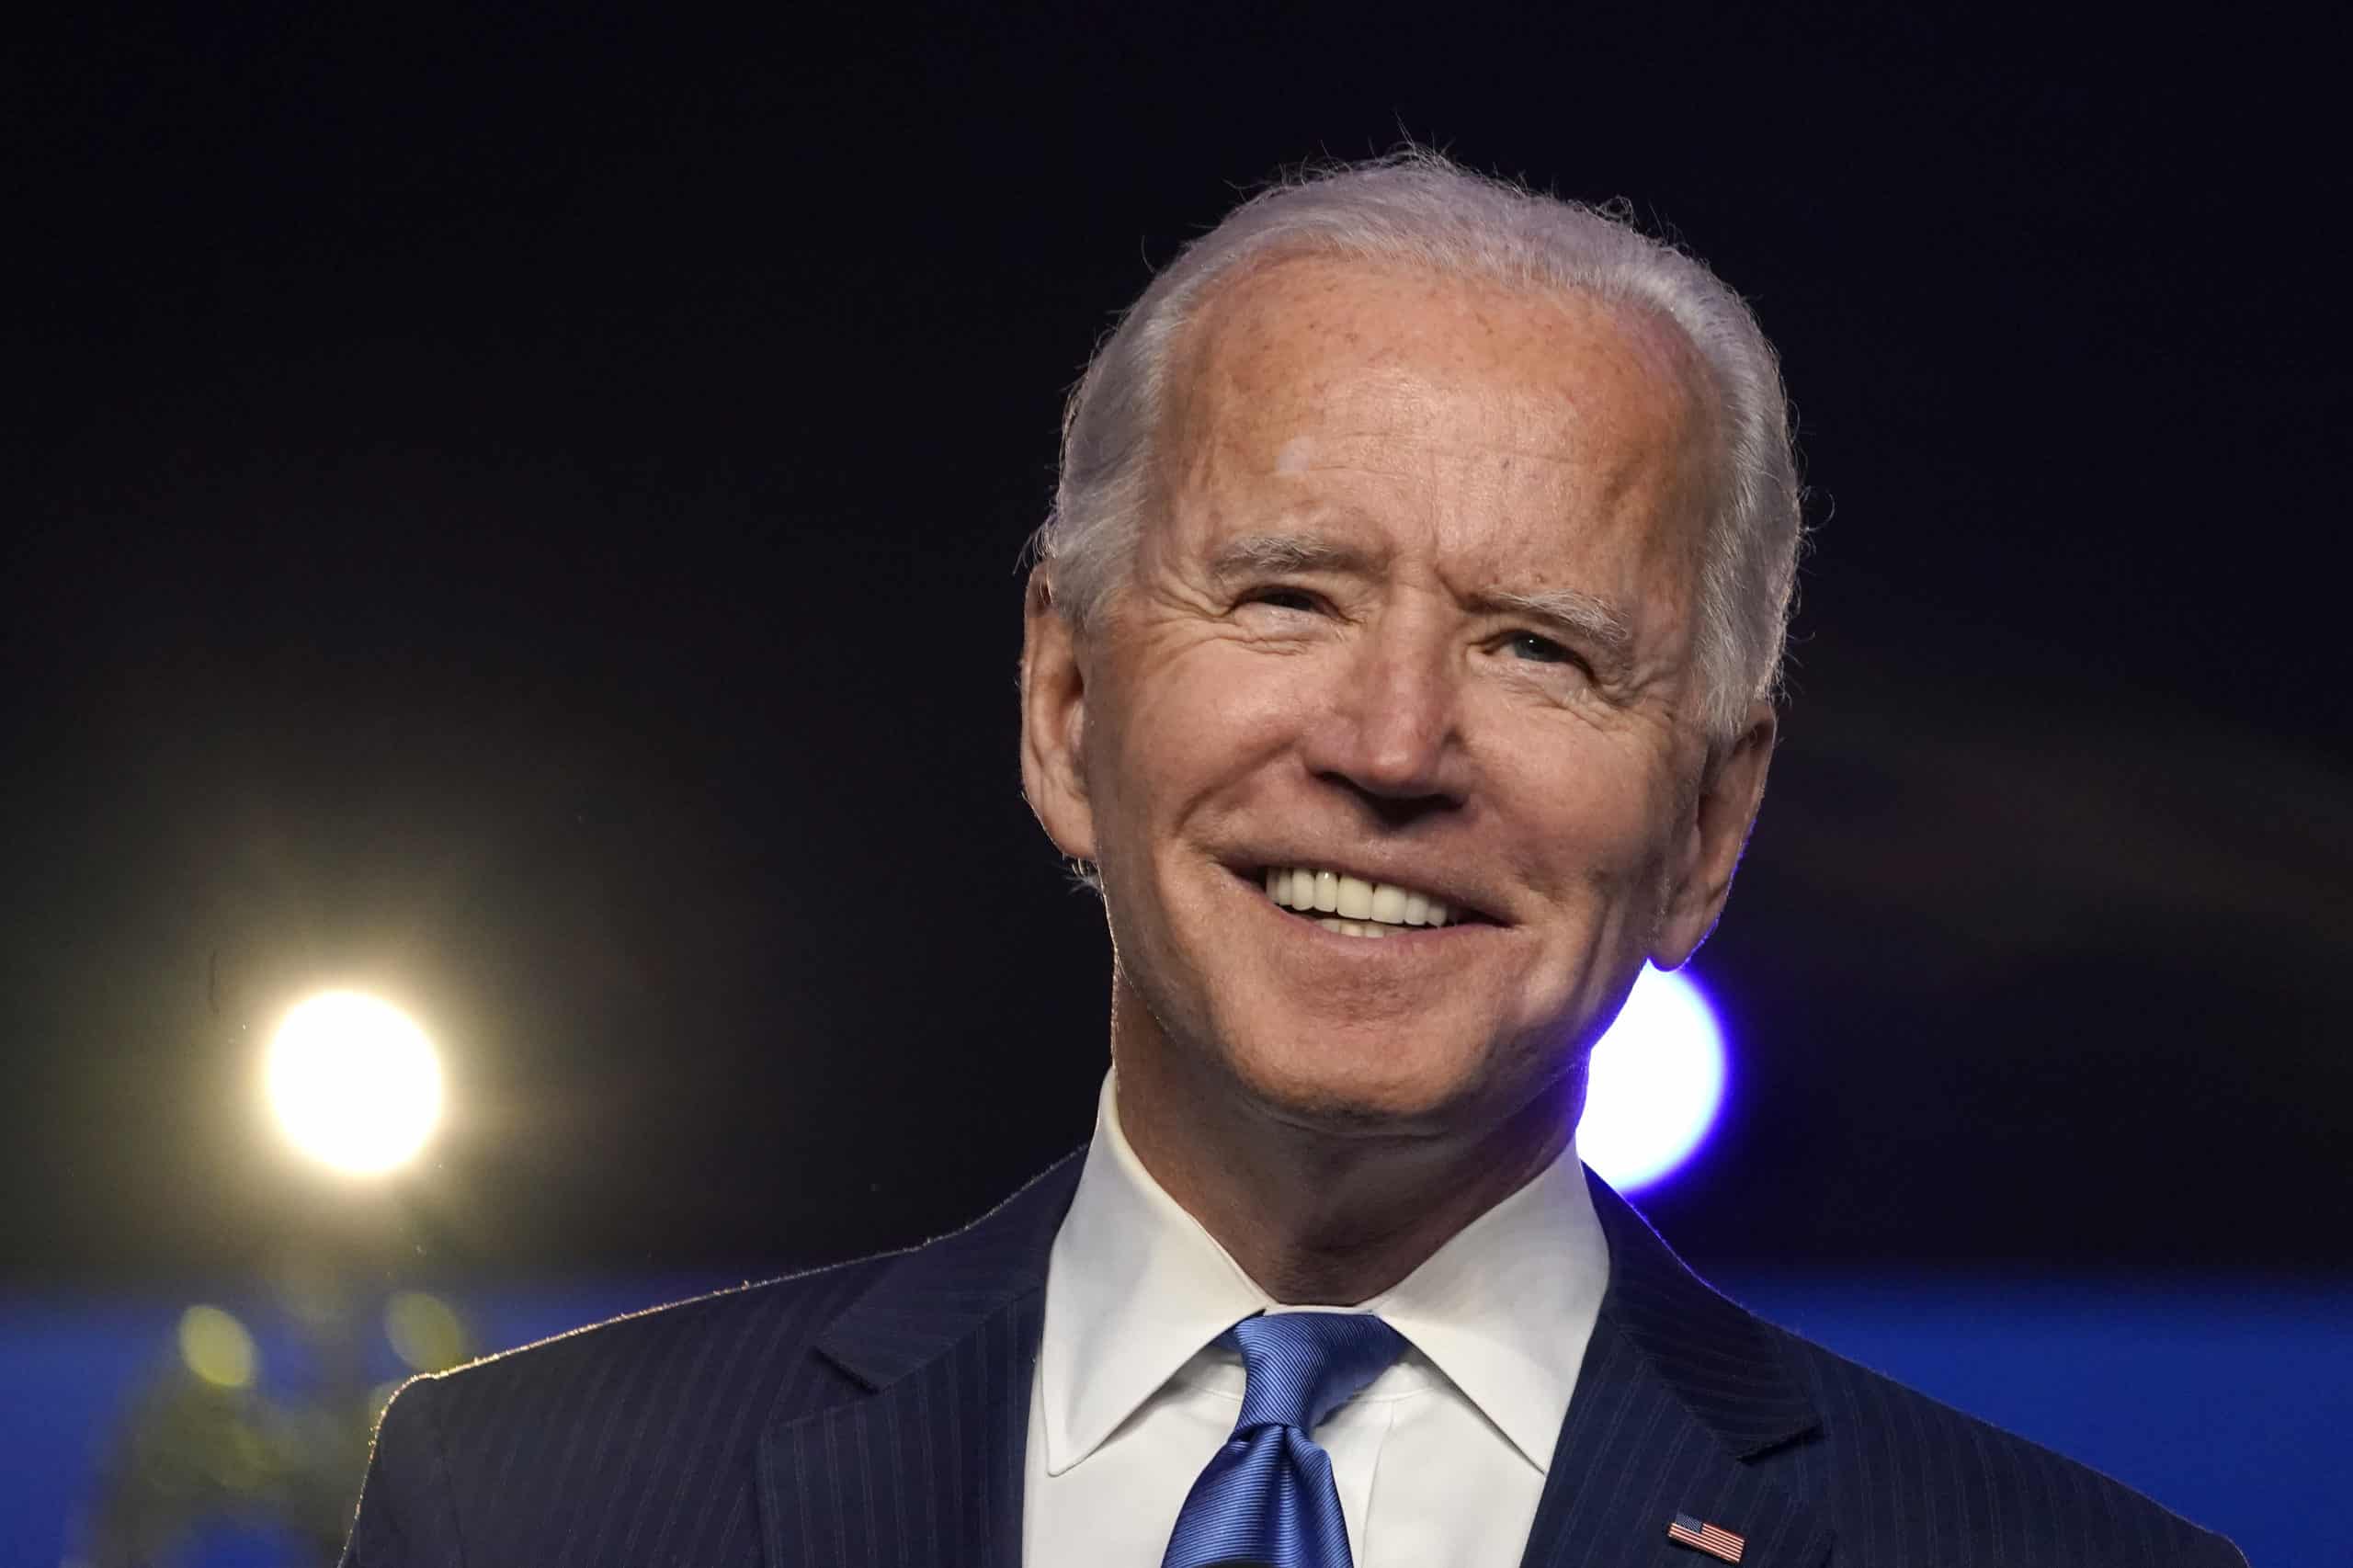 Joe Biden Projected To Be The 46th President Of The United States!